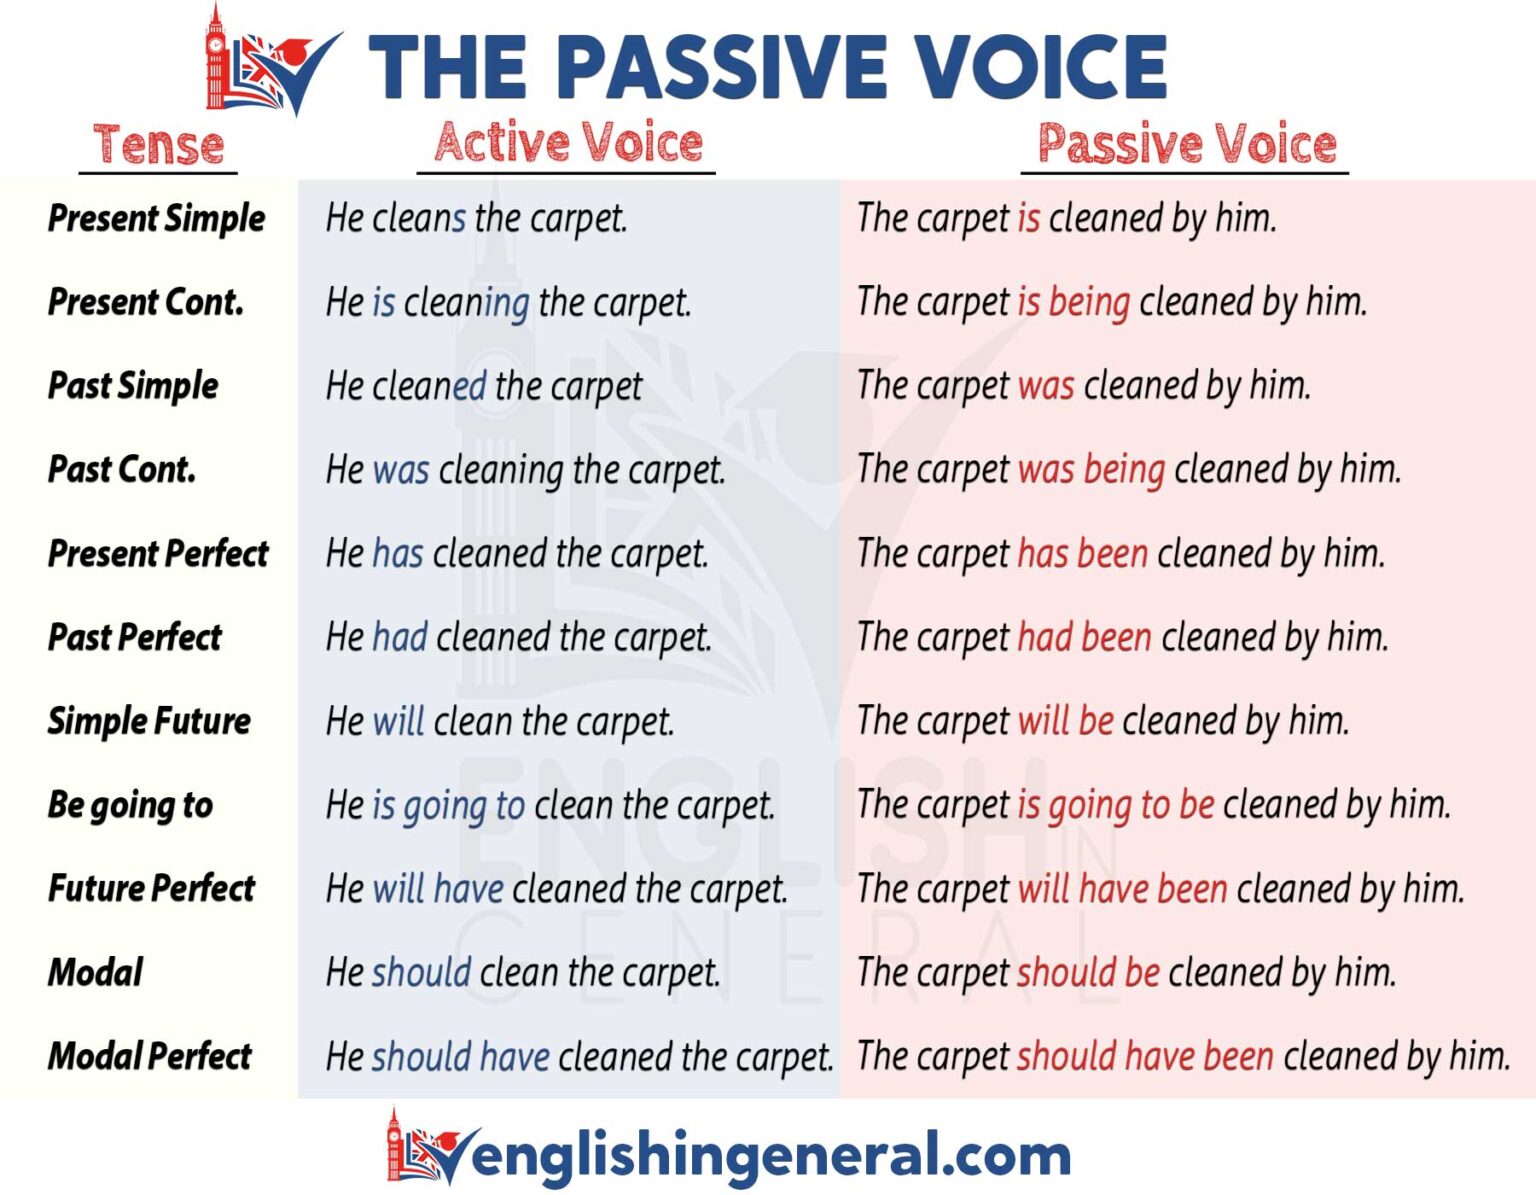 Passive Voice Meaning And Examples - IMAGESEE